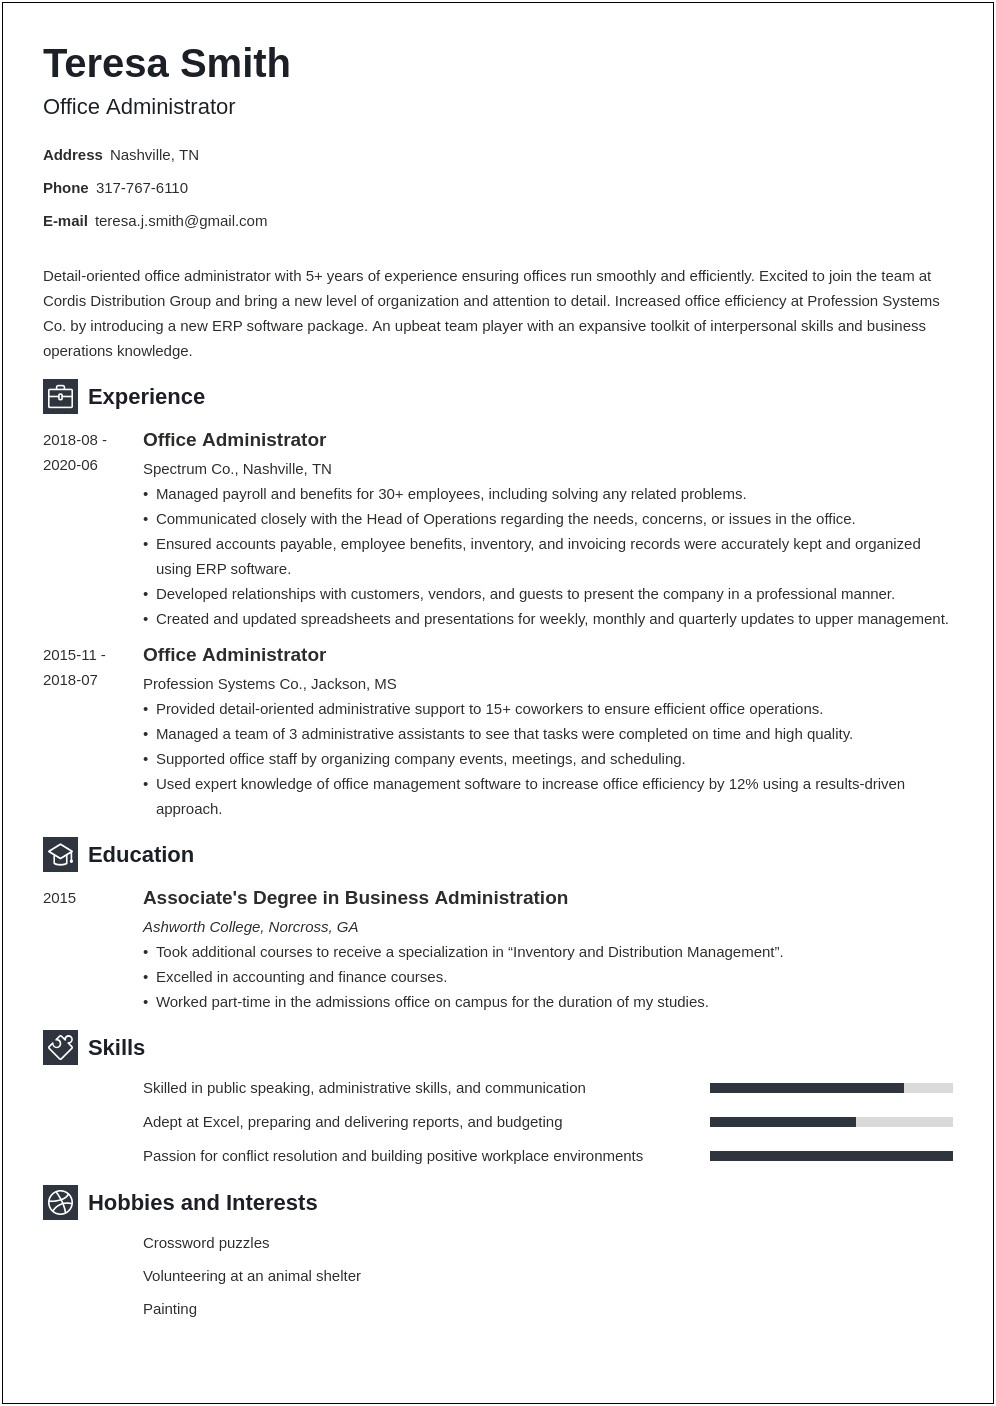 Describe Record Keeping Skills For Resume